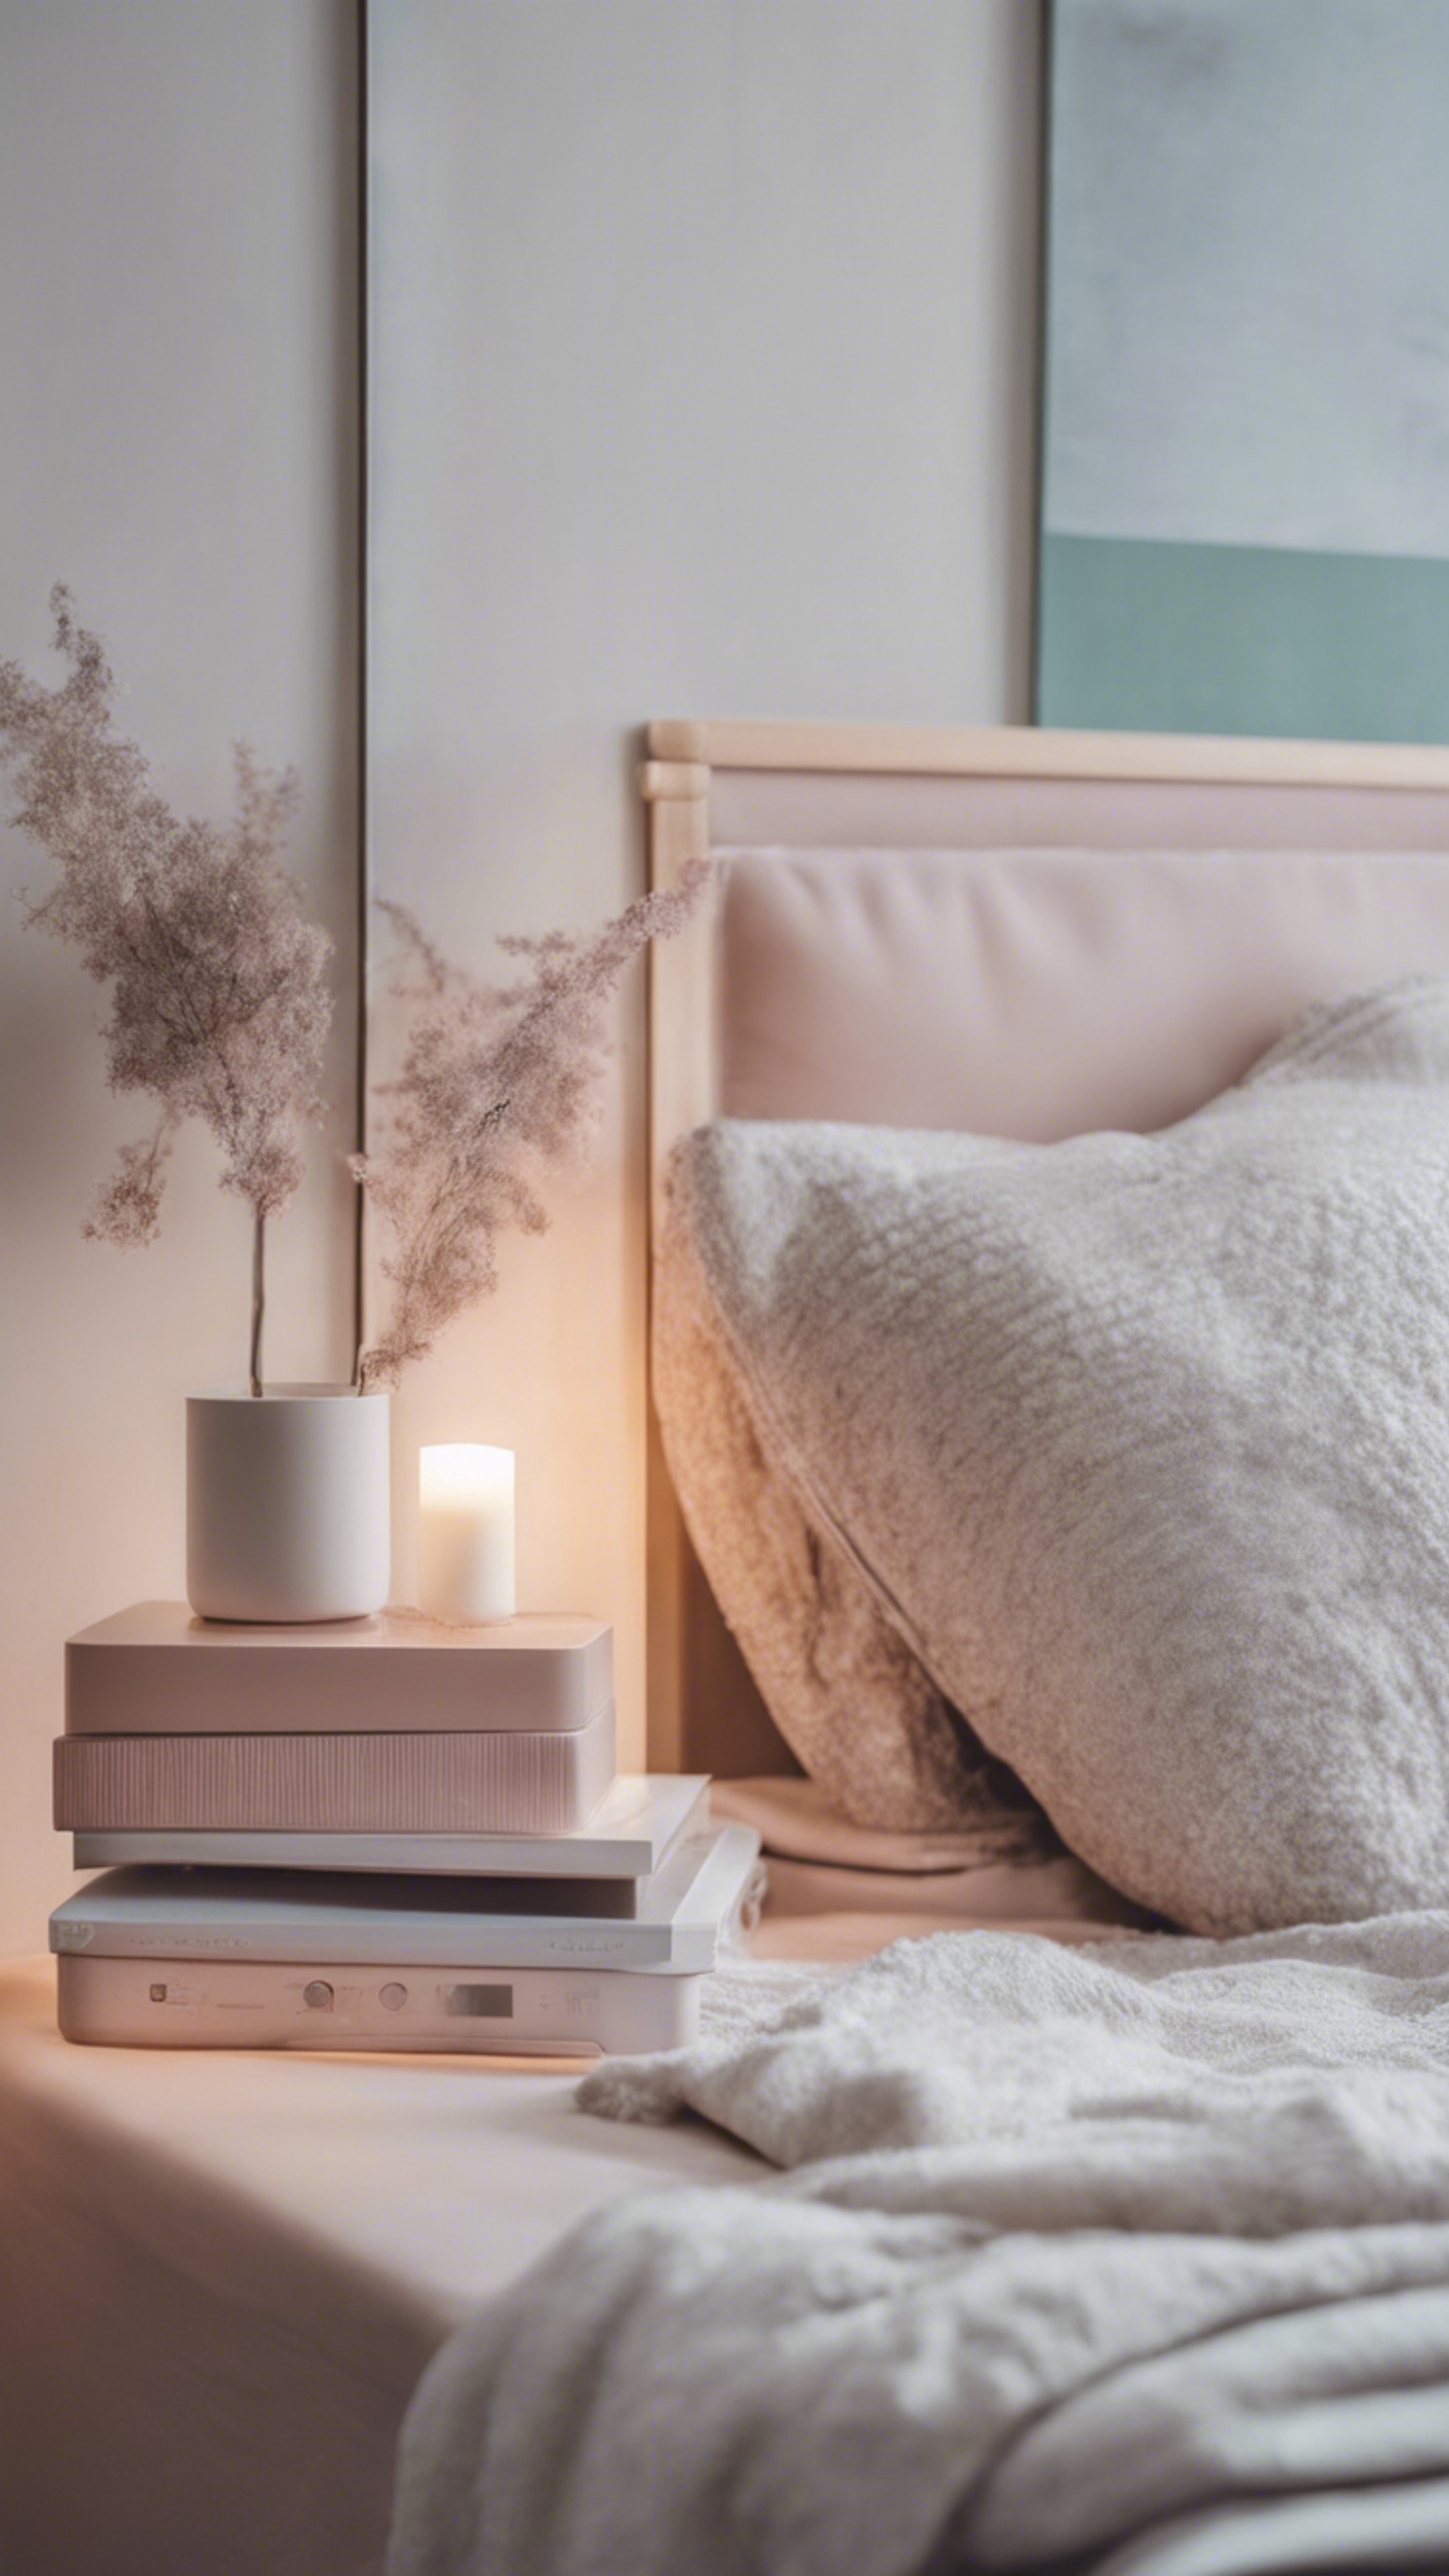 A modern minimalist bedroom in pastel hues with cozy blankets and a stylish bedside table. Hintergrund[e12df14007a0419d89d8]